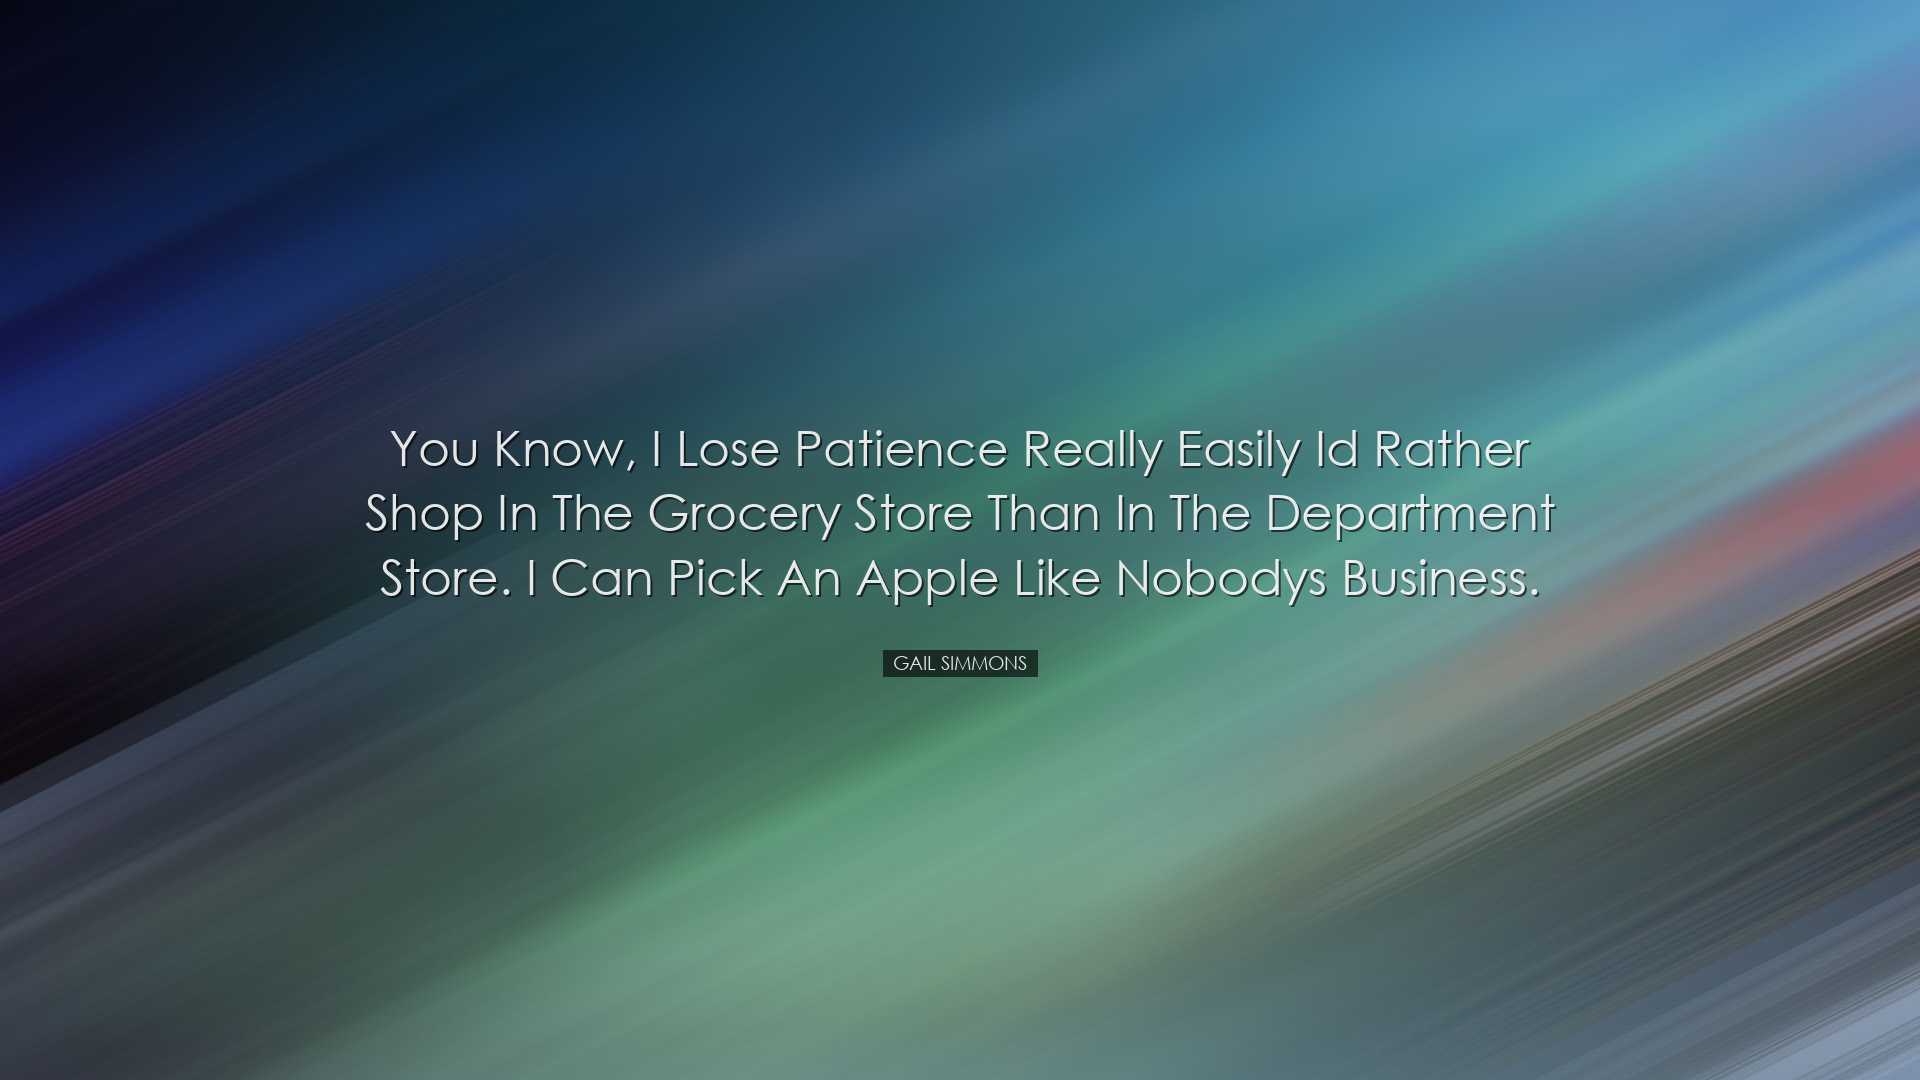 You know, I lose patience really easily Id rather shop in the groc